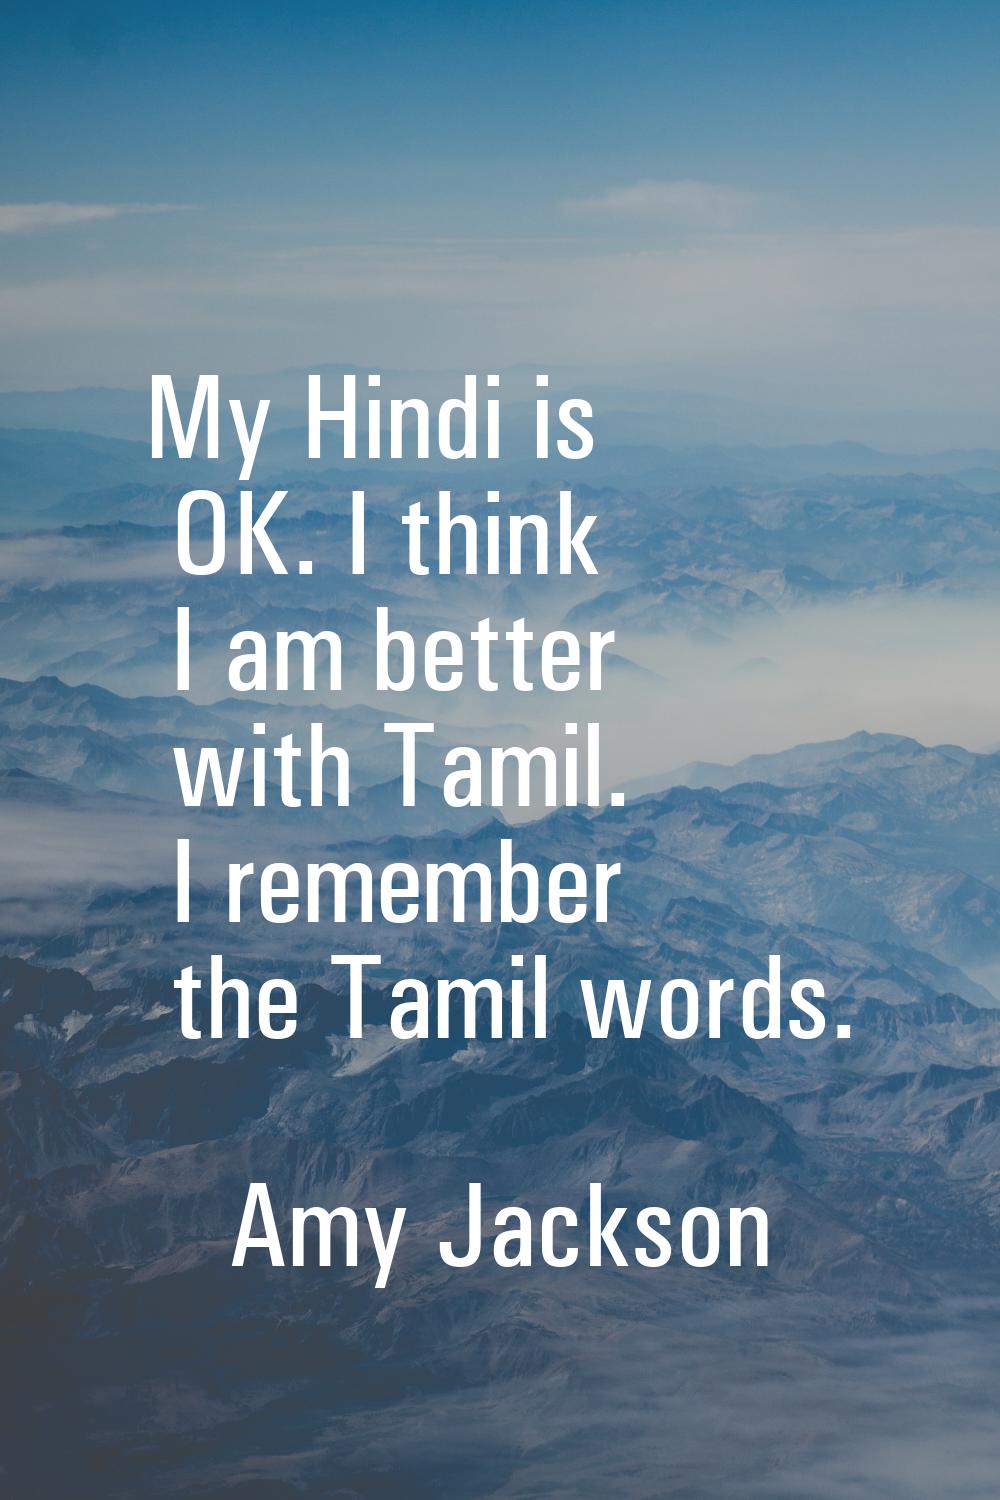 My Hindi is OK. I think I am better with Tamil. I remember the Tamil words.